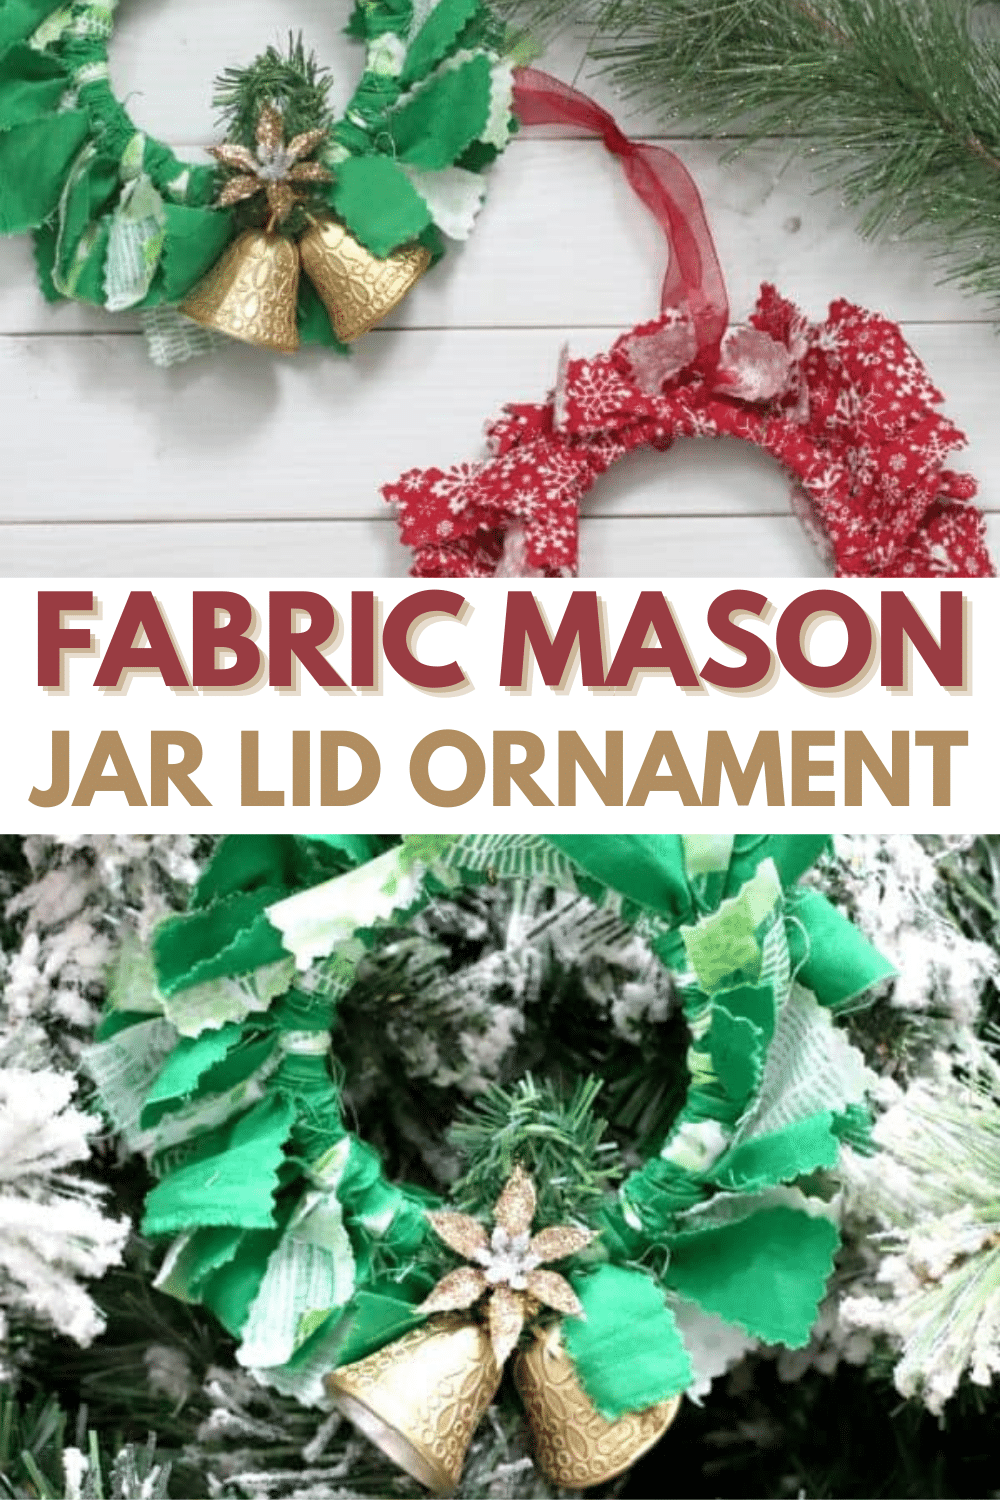 These DIY fabric mason jar lid ornaments are so easy to make and are a great way to use up scrap fabric and repurpose old mason jar lid rings. #diyornaments #christmas #repurpose via @wondermomwannab